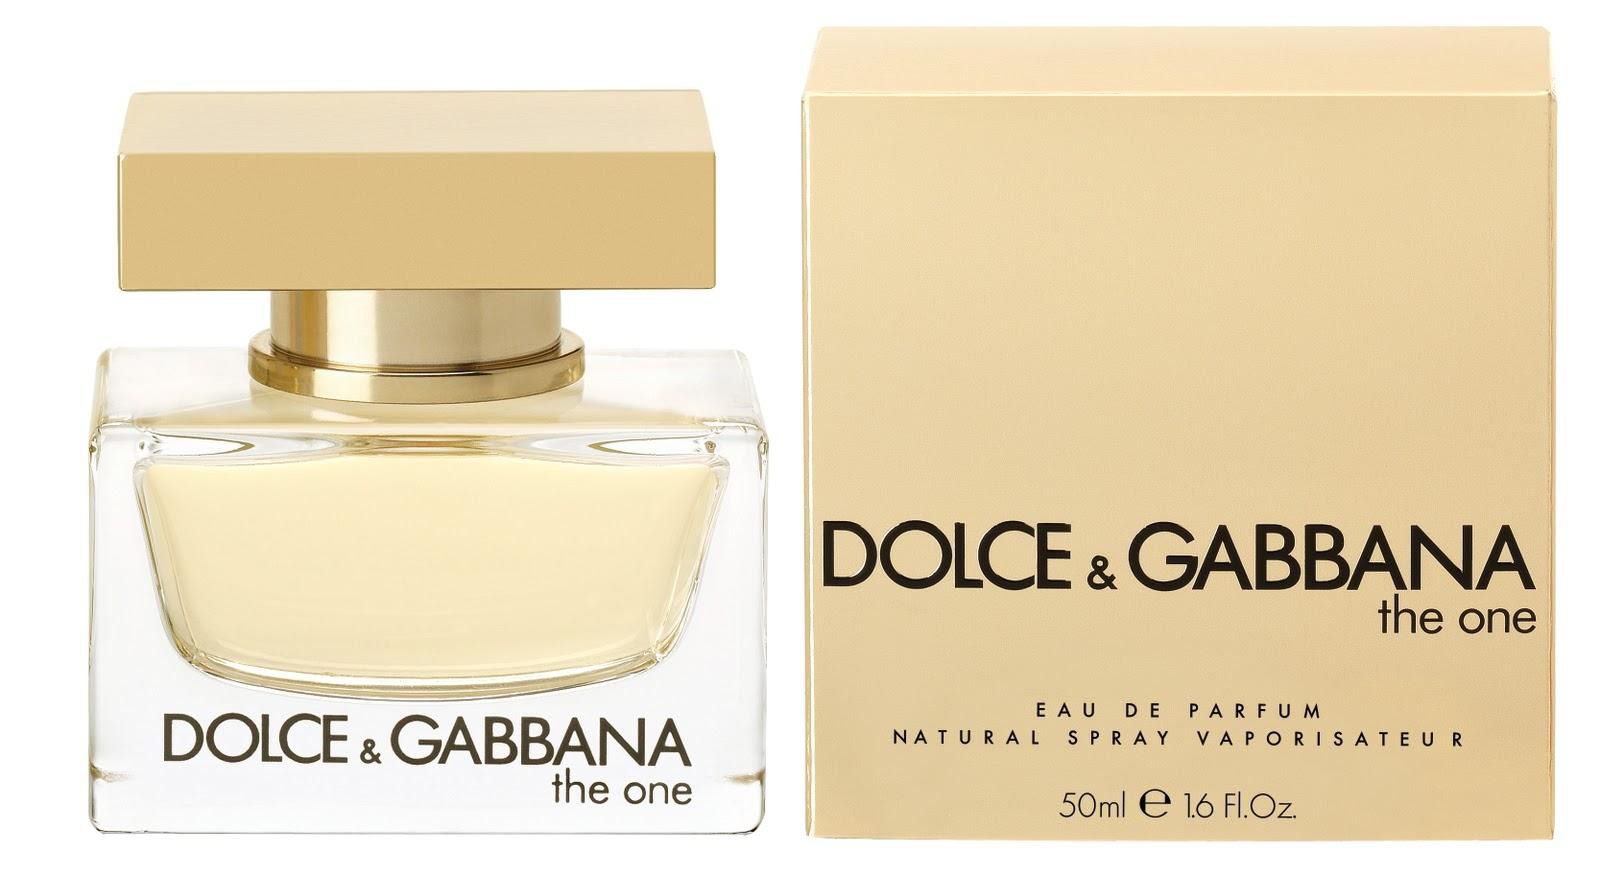 assets/images/dolce-and-gabbana/2.jpg